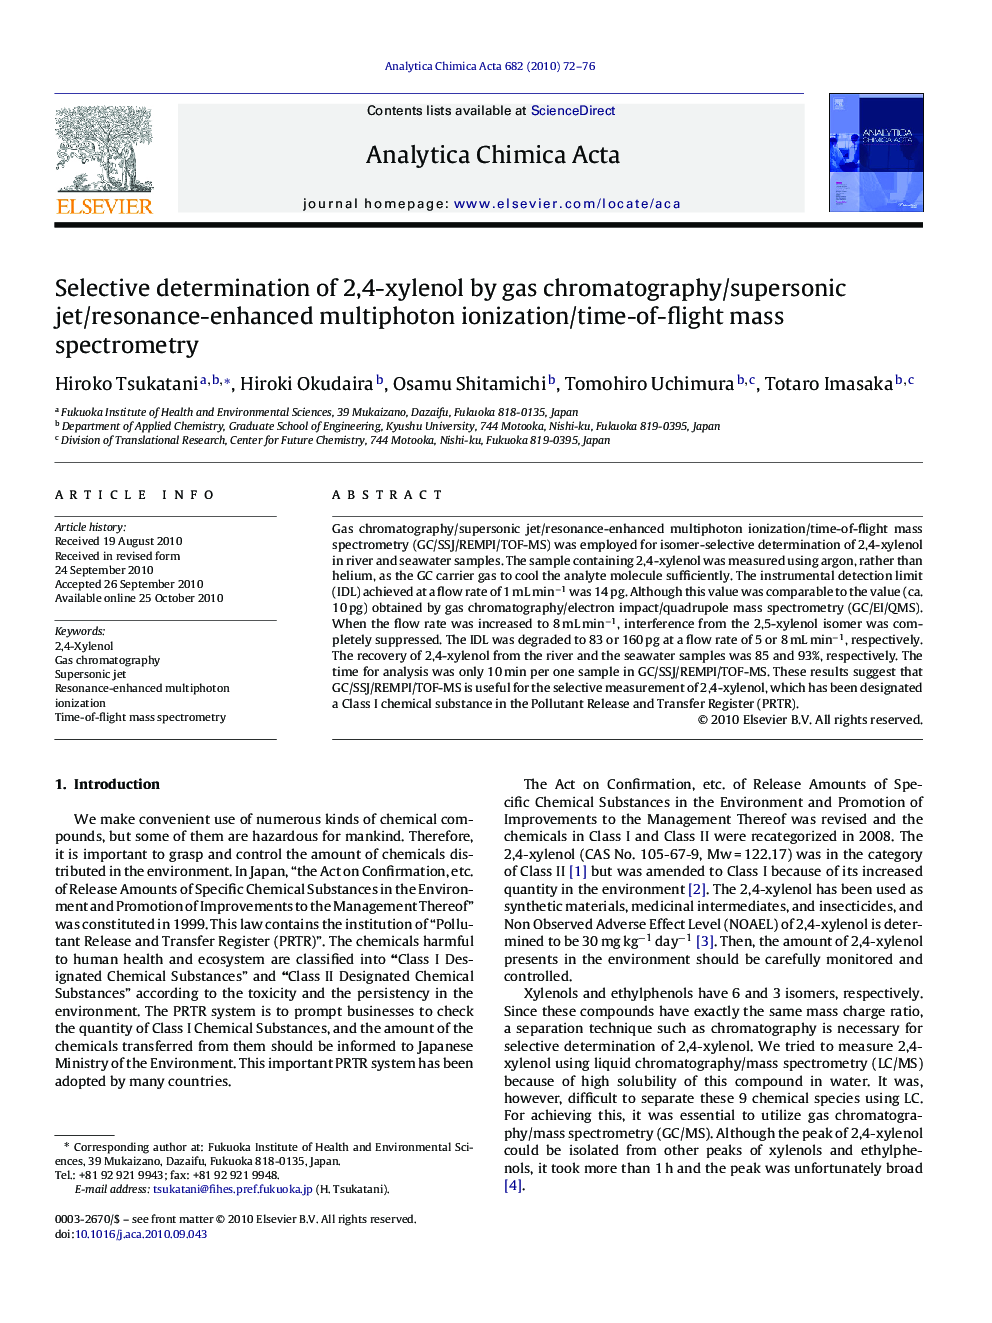 Selective determination of 2,4-xylenol by gas chromatography/supersonic jet/resonance-enhanced multiphoton ionization/time-of-flight mass spectrometry